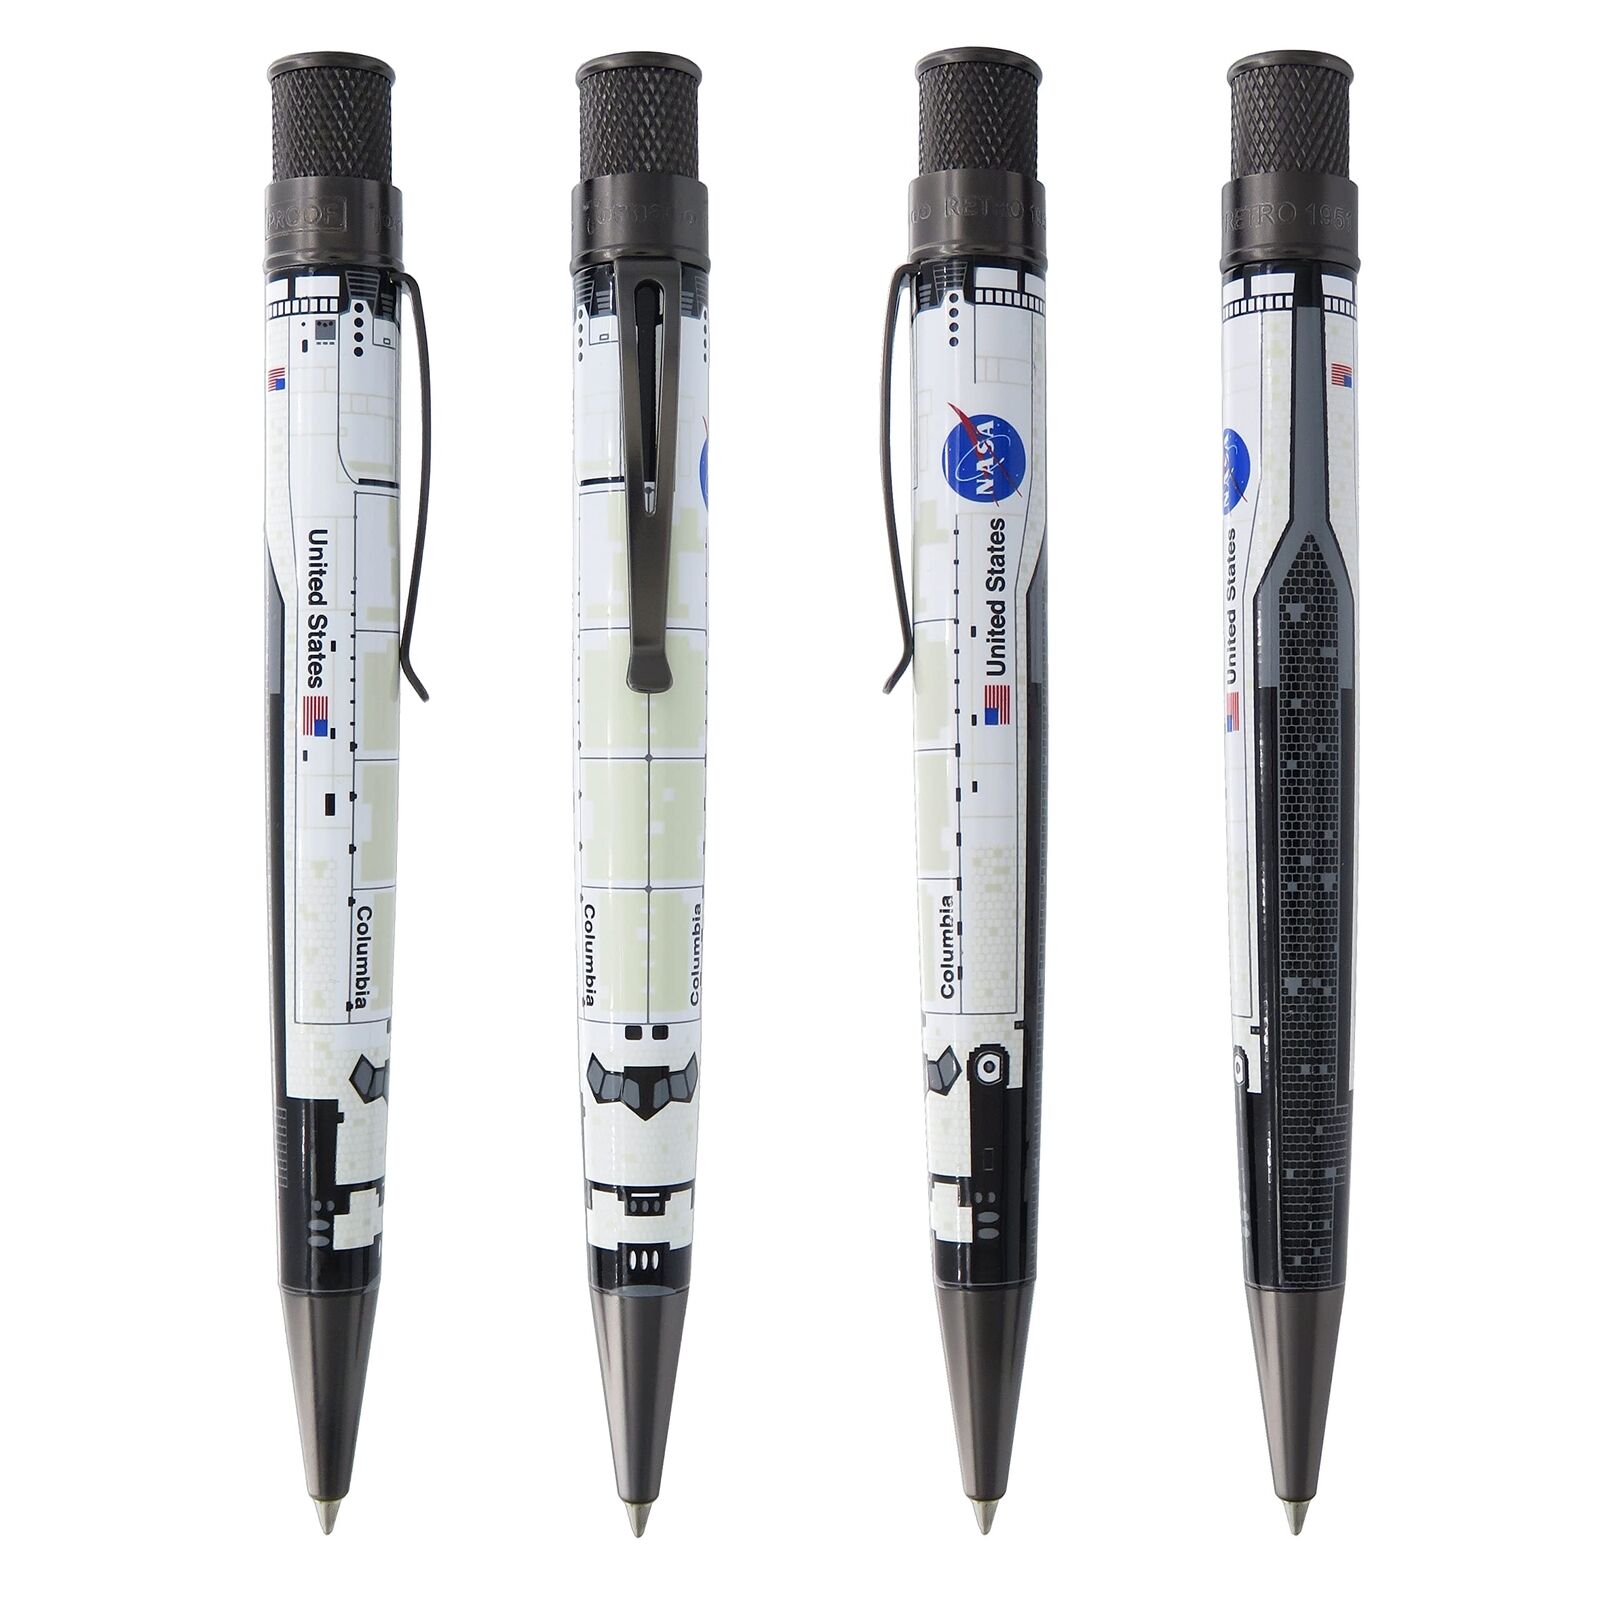 Retro 51 Limited Edition Pen Columbia Space Shuttle